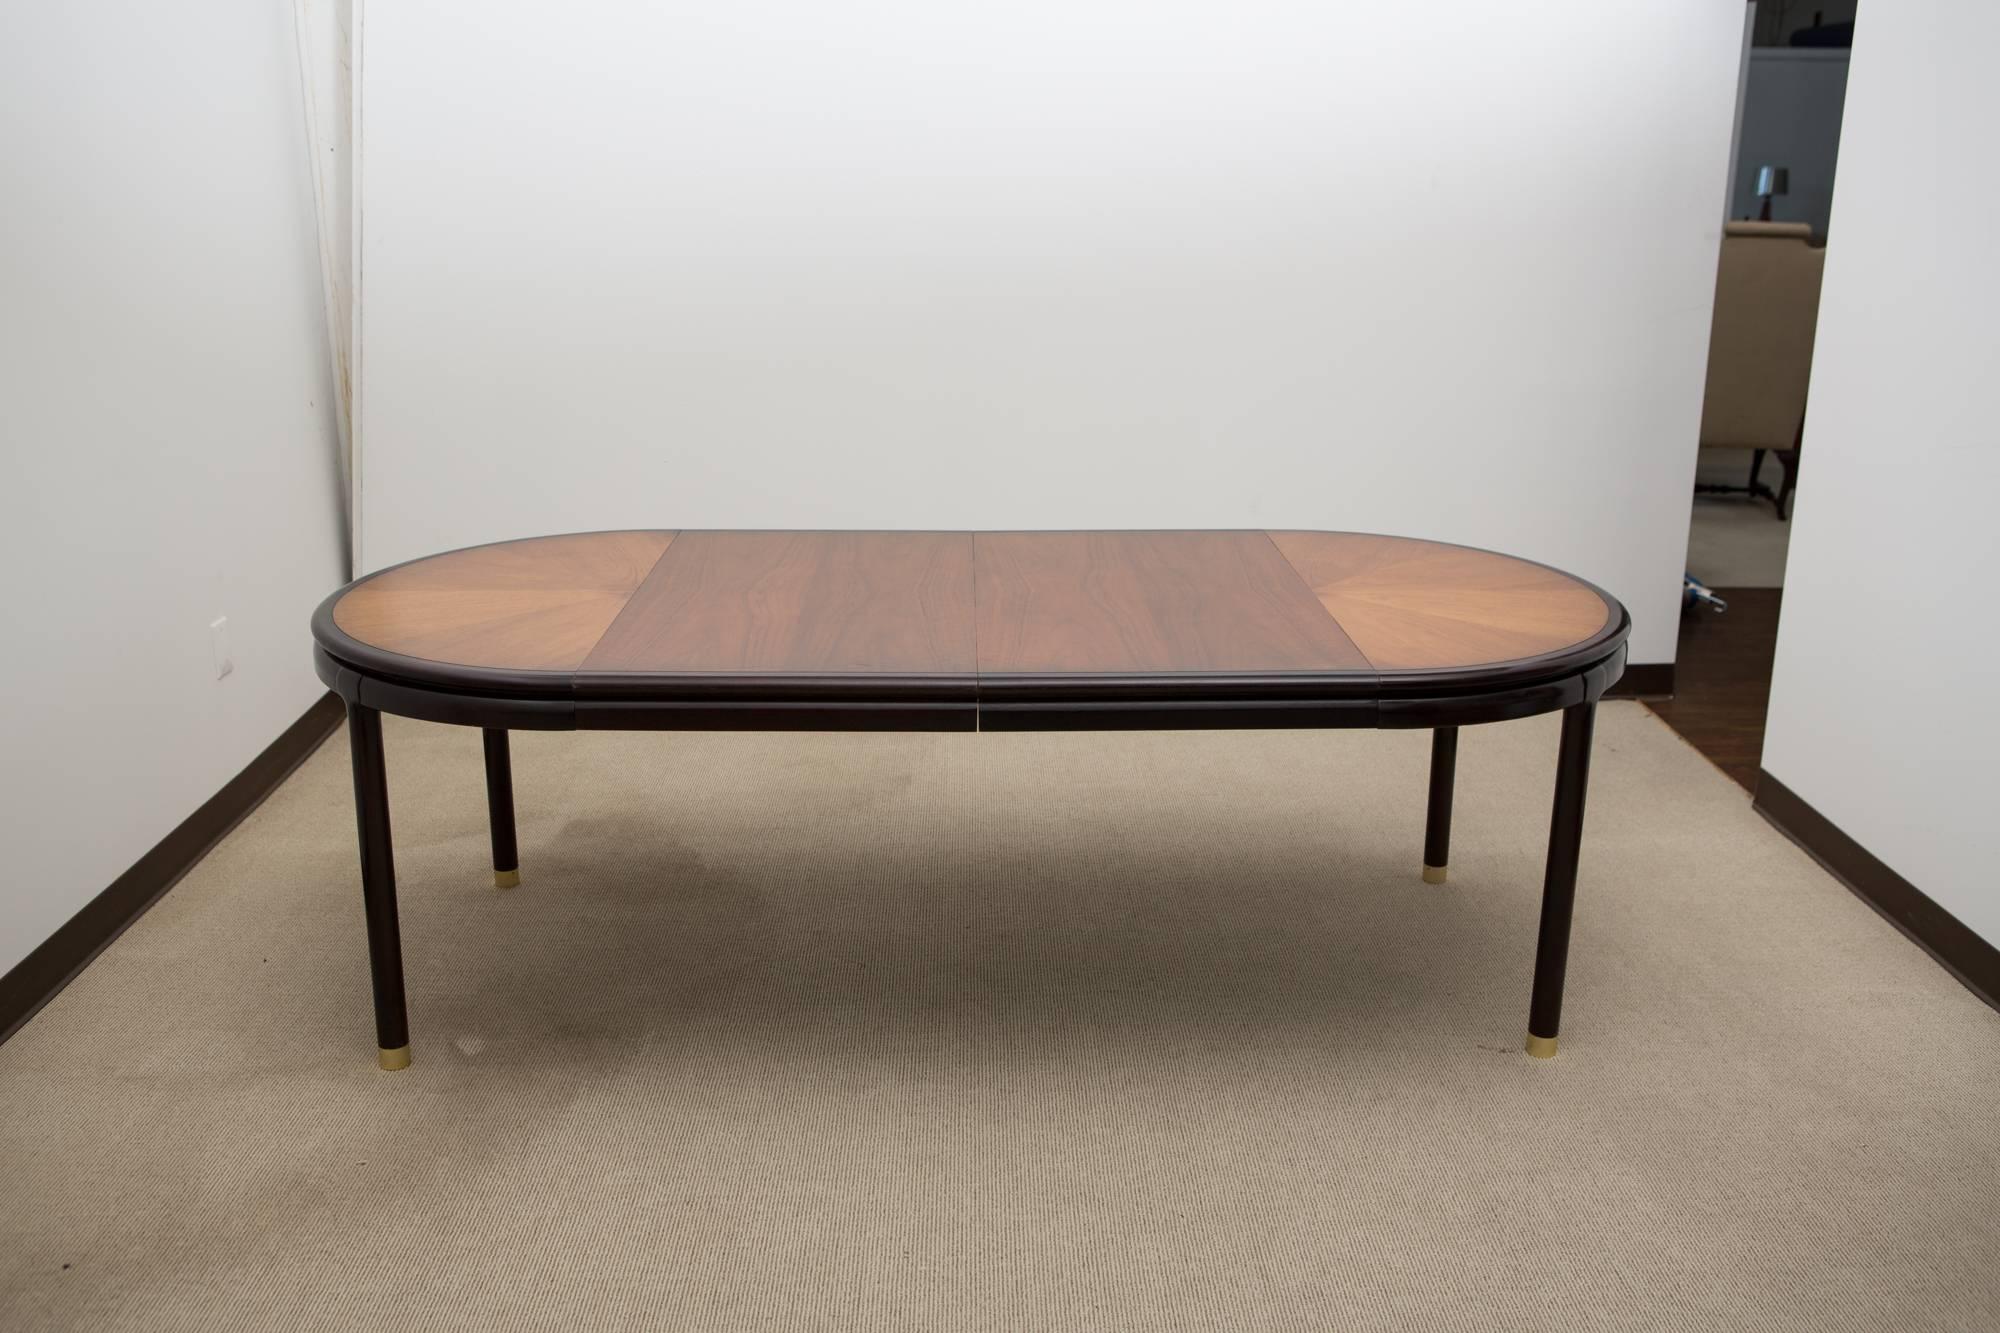 Late 20th Century Midcentury Dining Table with Two Leaves